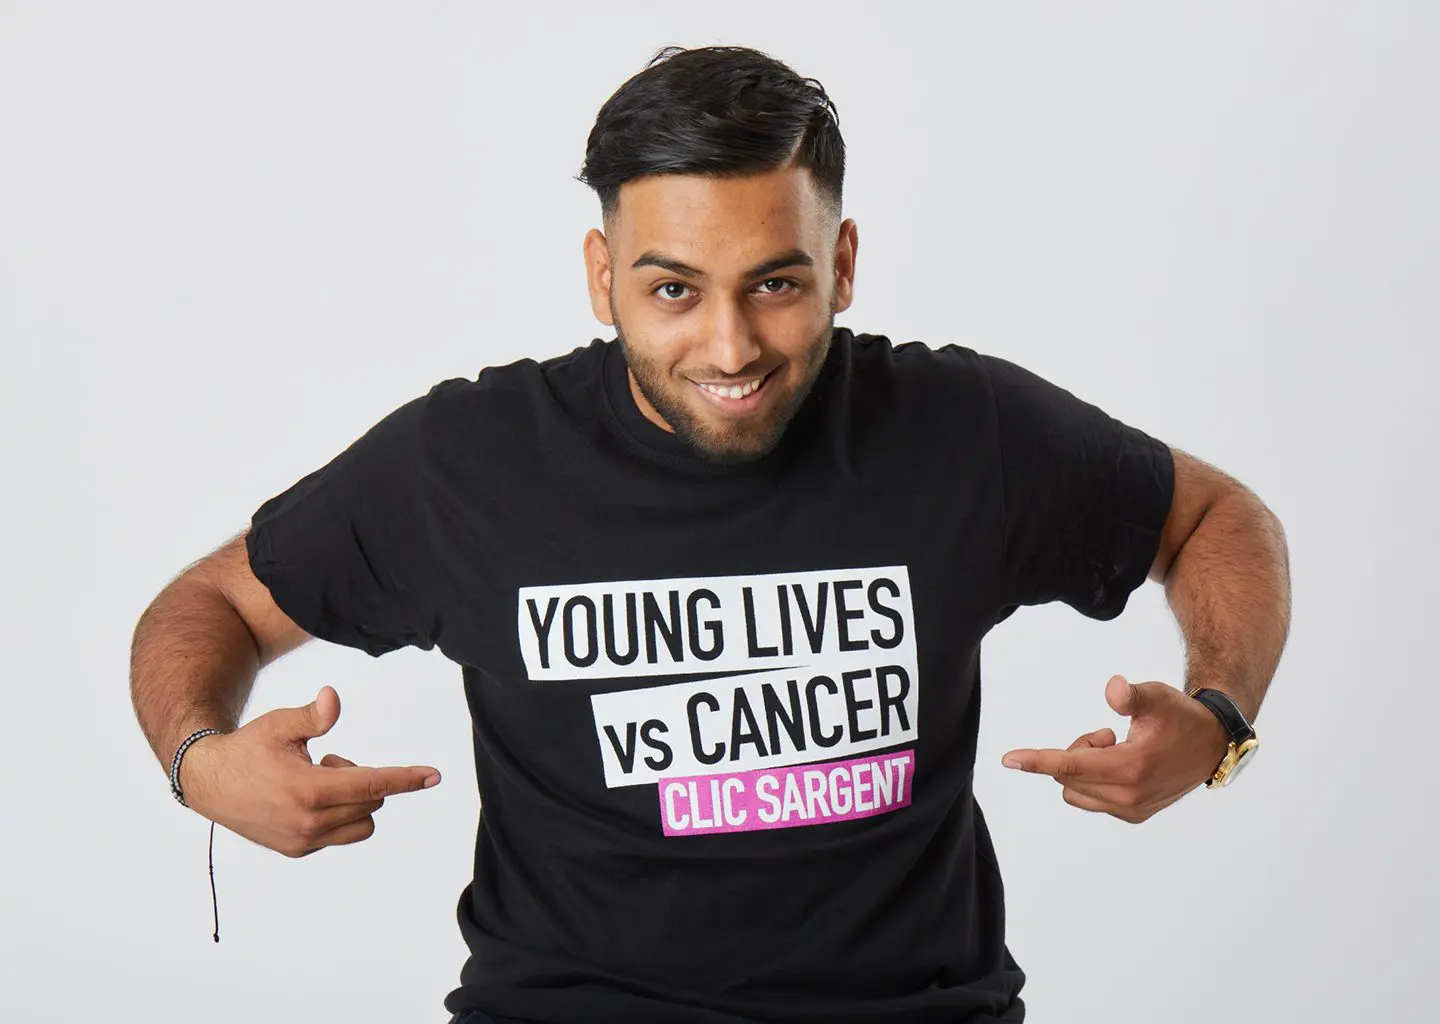 Boy pointing at Young Lives vs Cancer logo on shirt